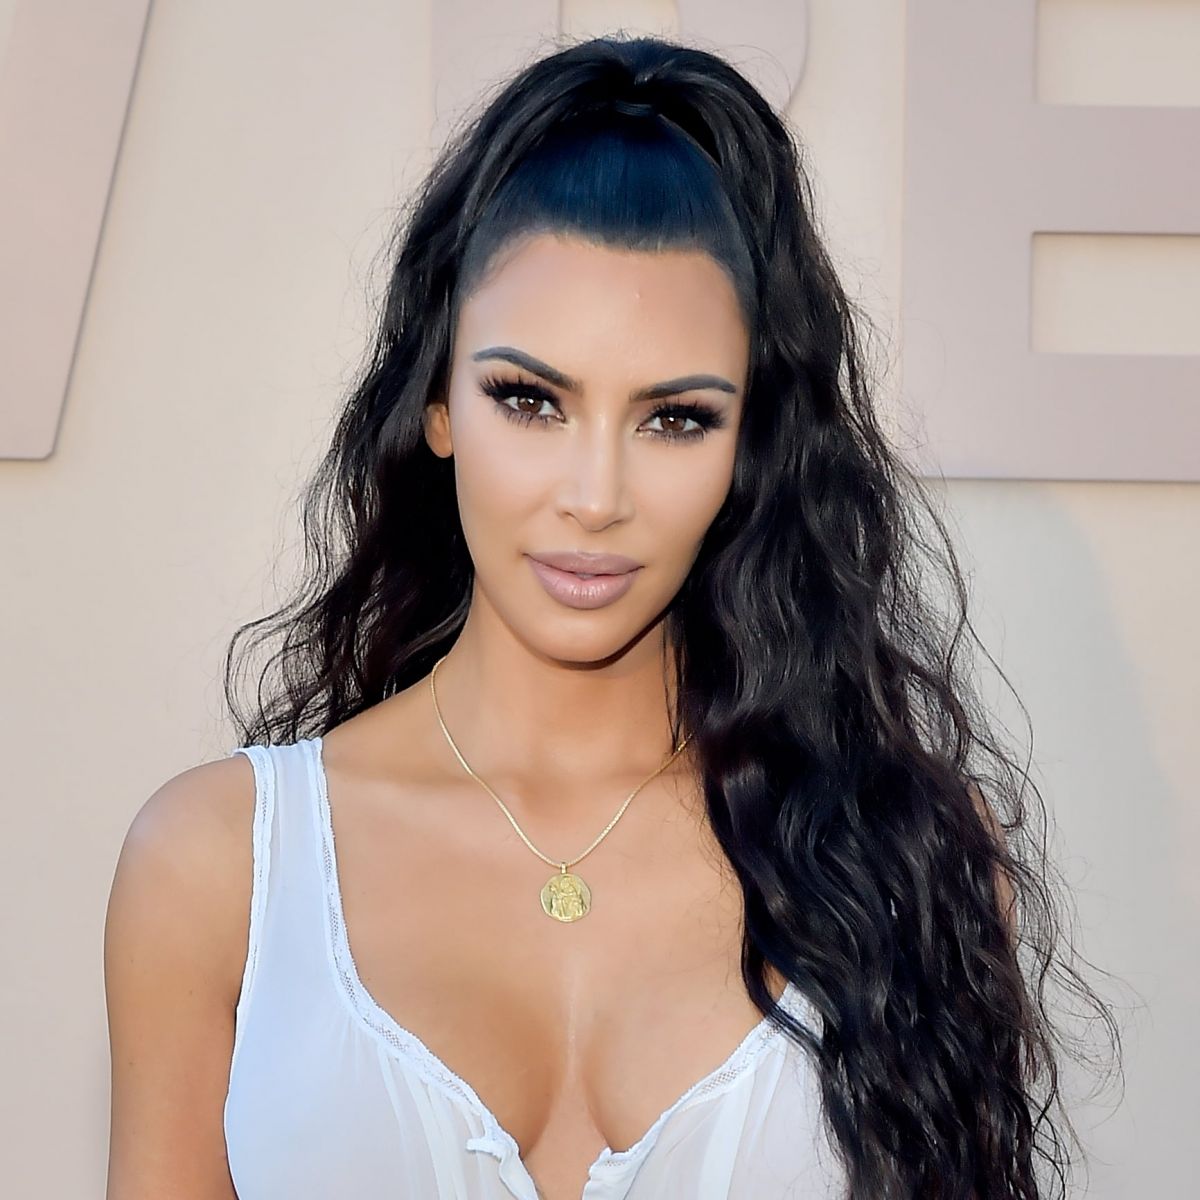 Do You know? Kim is a mix of a descent, Having an American dad and a Dutch-English-Irish-Scottish Mum